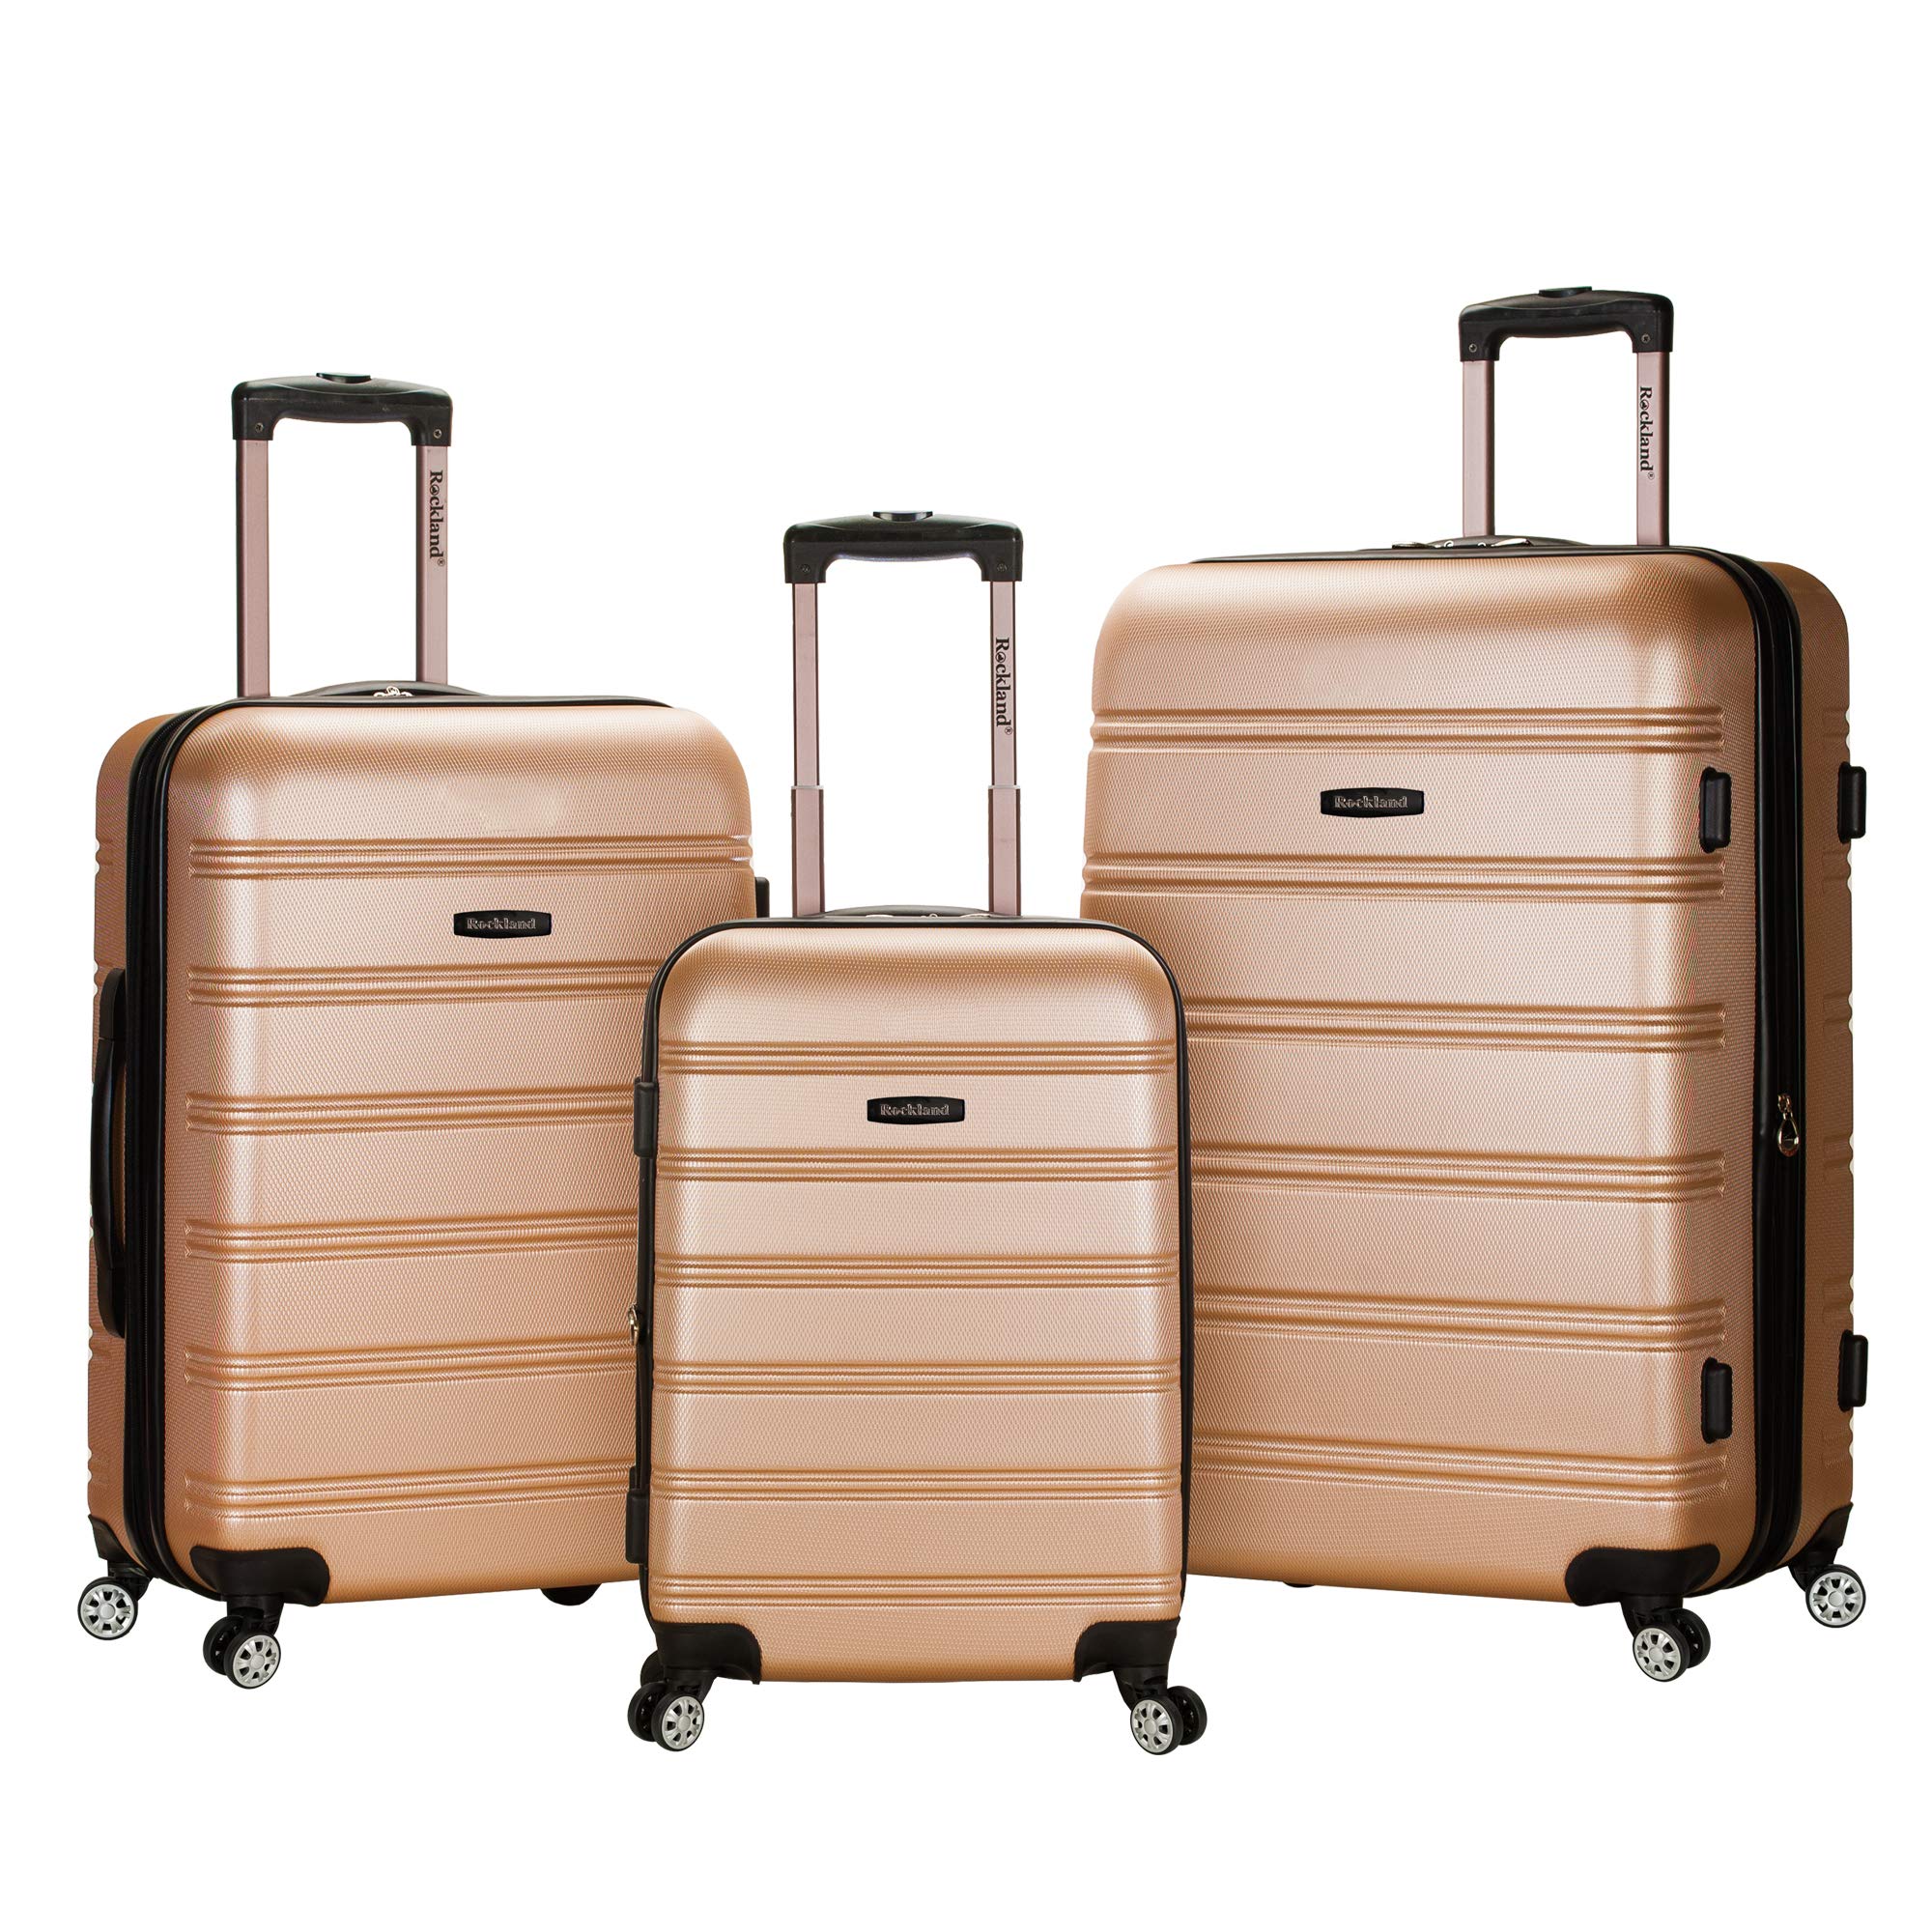 ROCKLAND LUGGAGE SET REVIEW//PINK AND MINT - YouTube